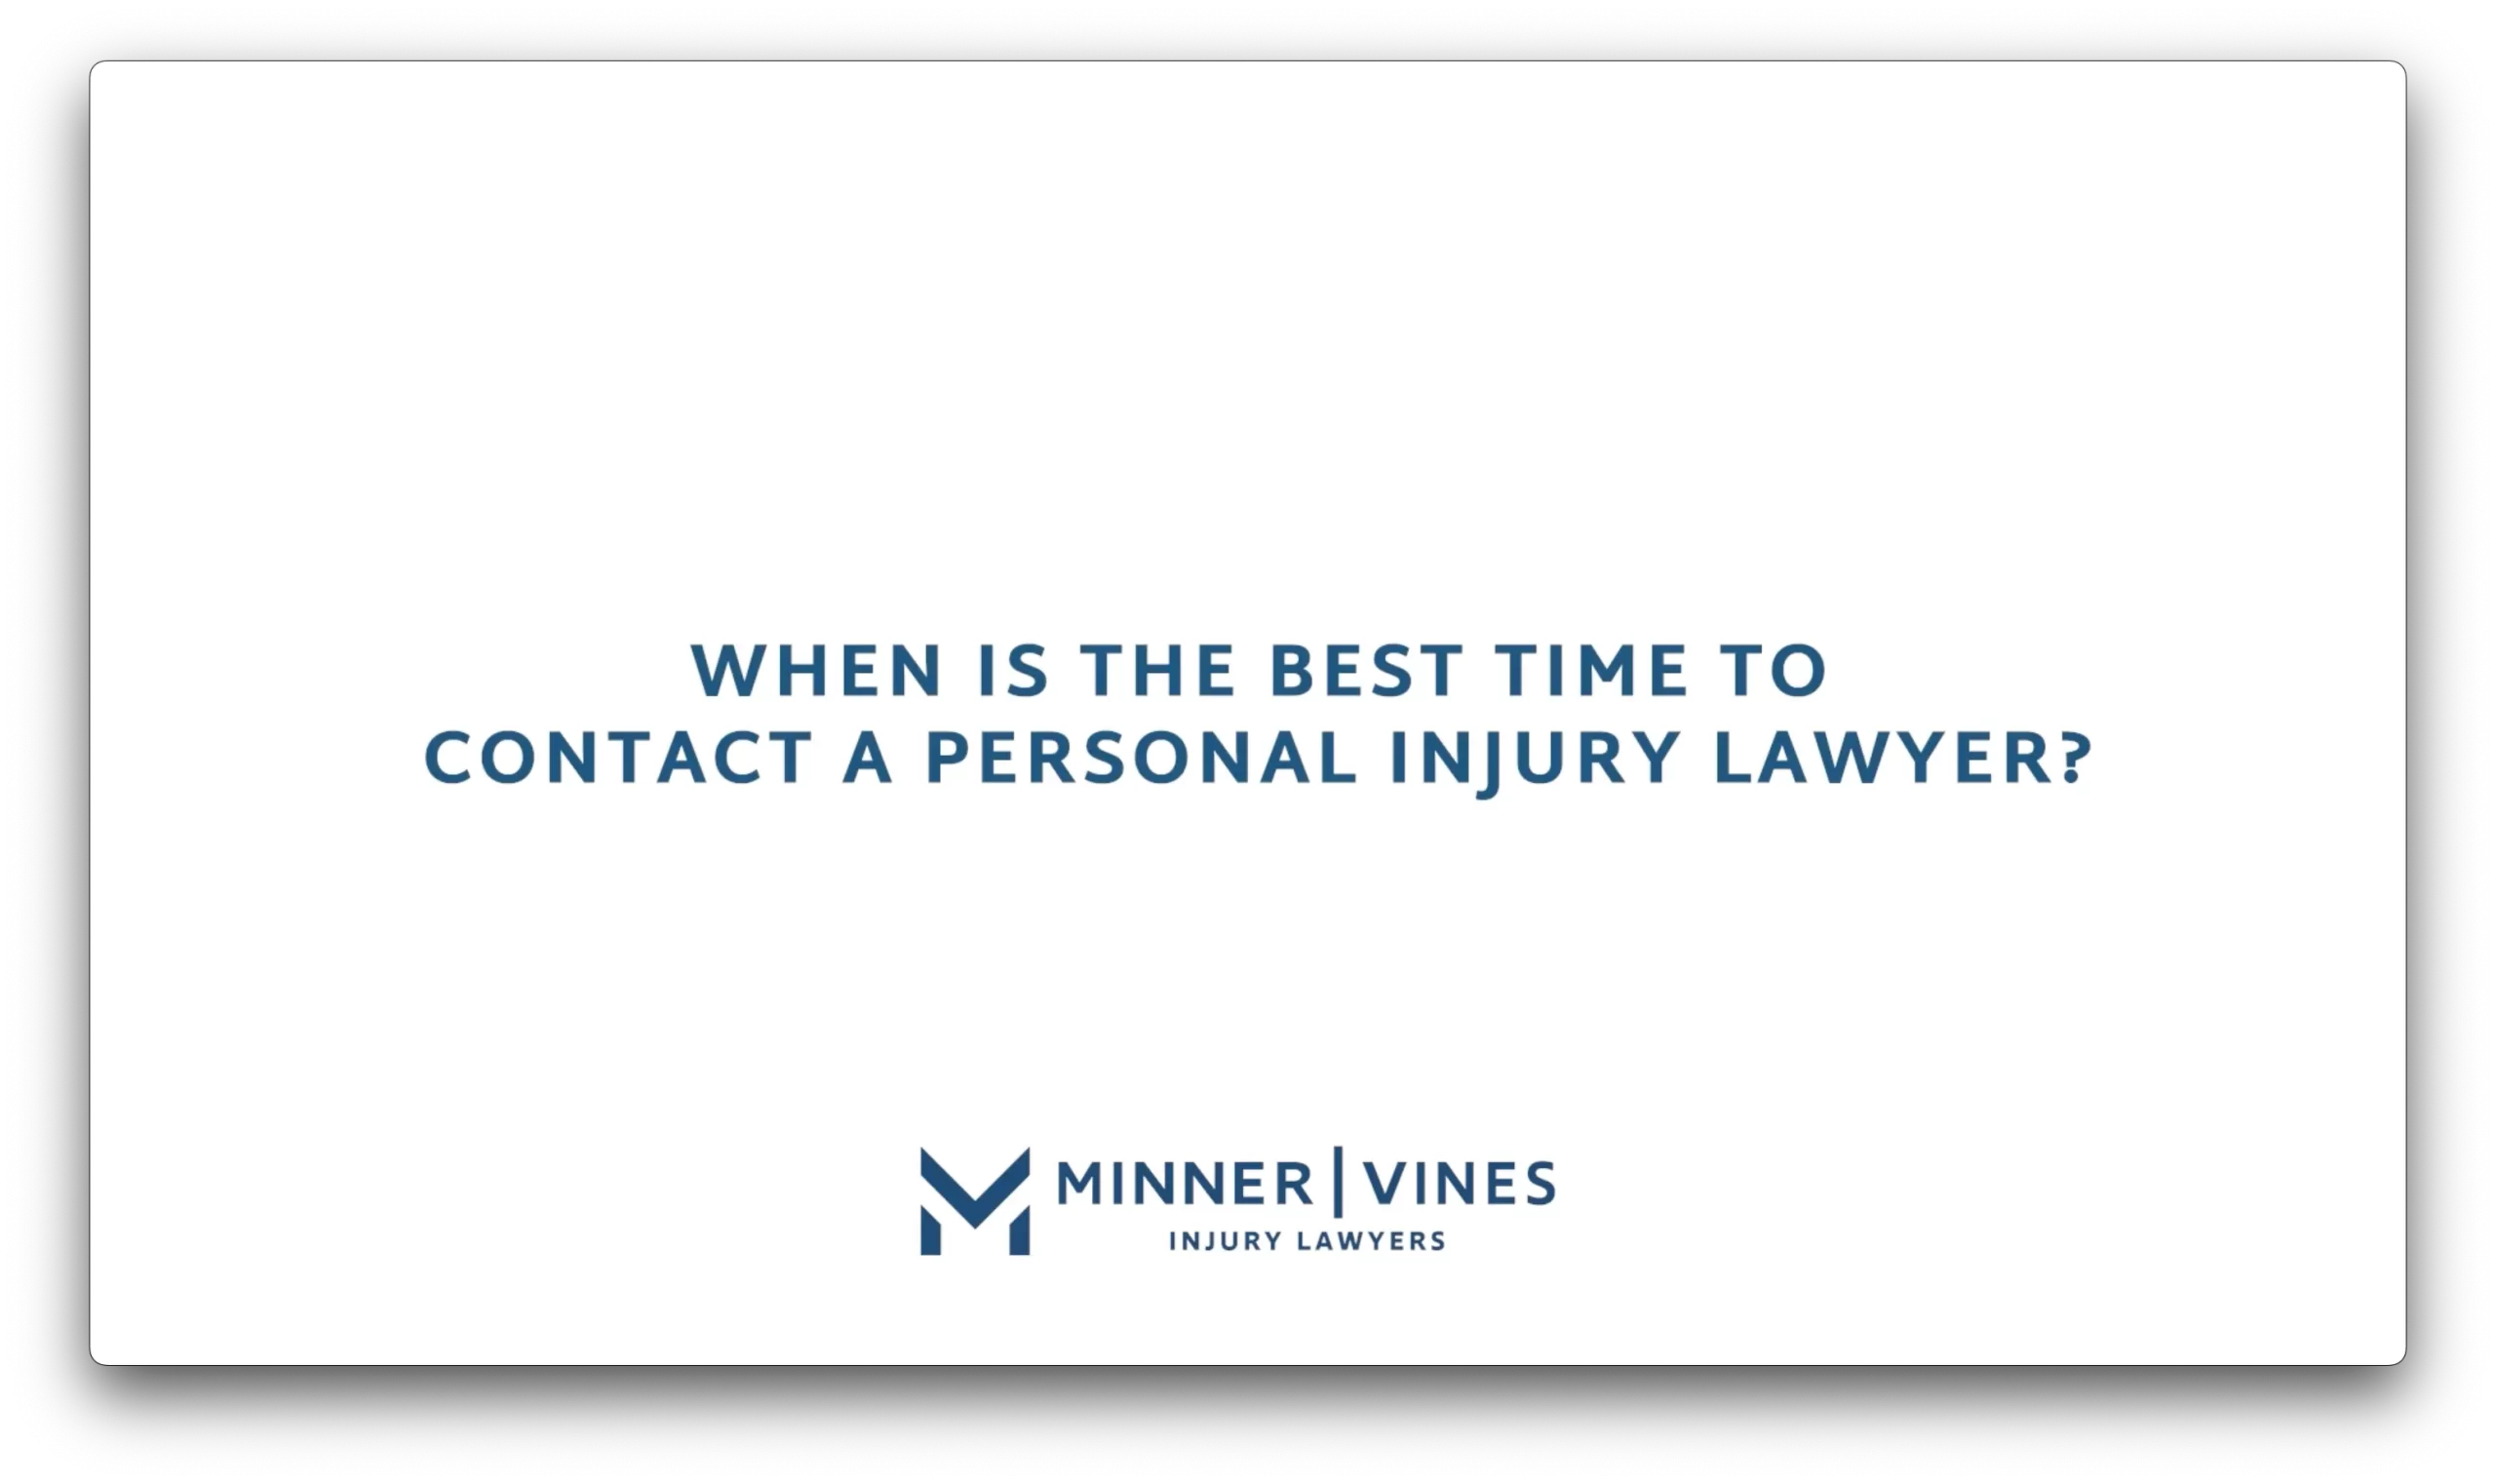 When should I contact a personal injury lawyer?